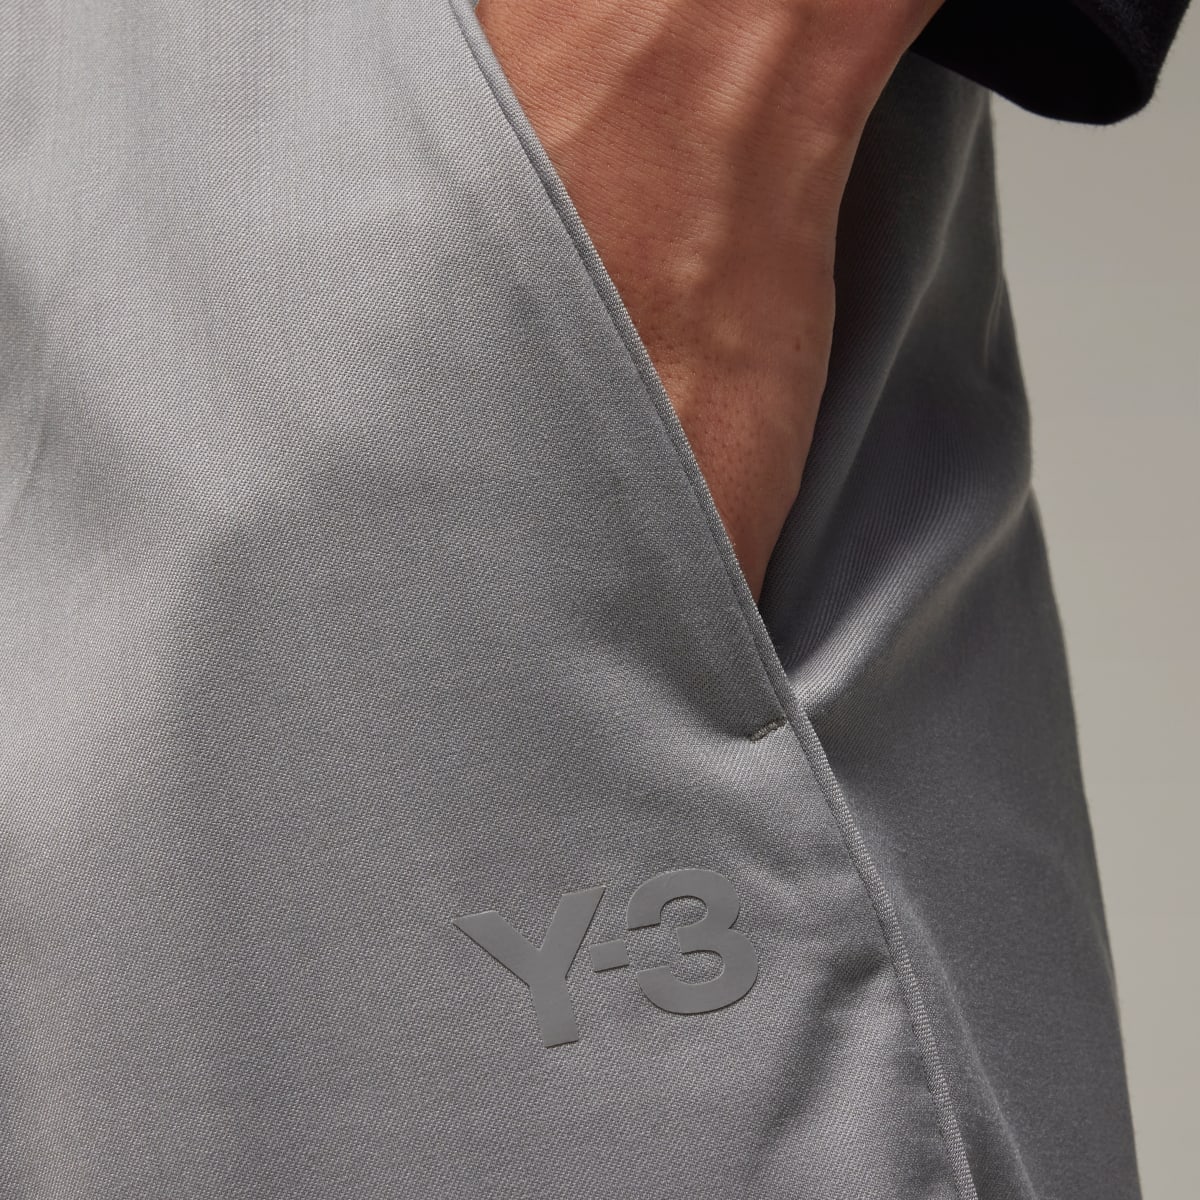 Adidas Y-3 Refined Woven Cuffed Tracksuit Bottoms. 7